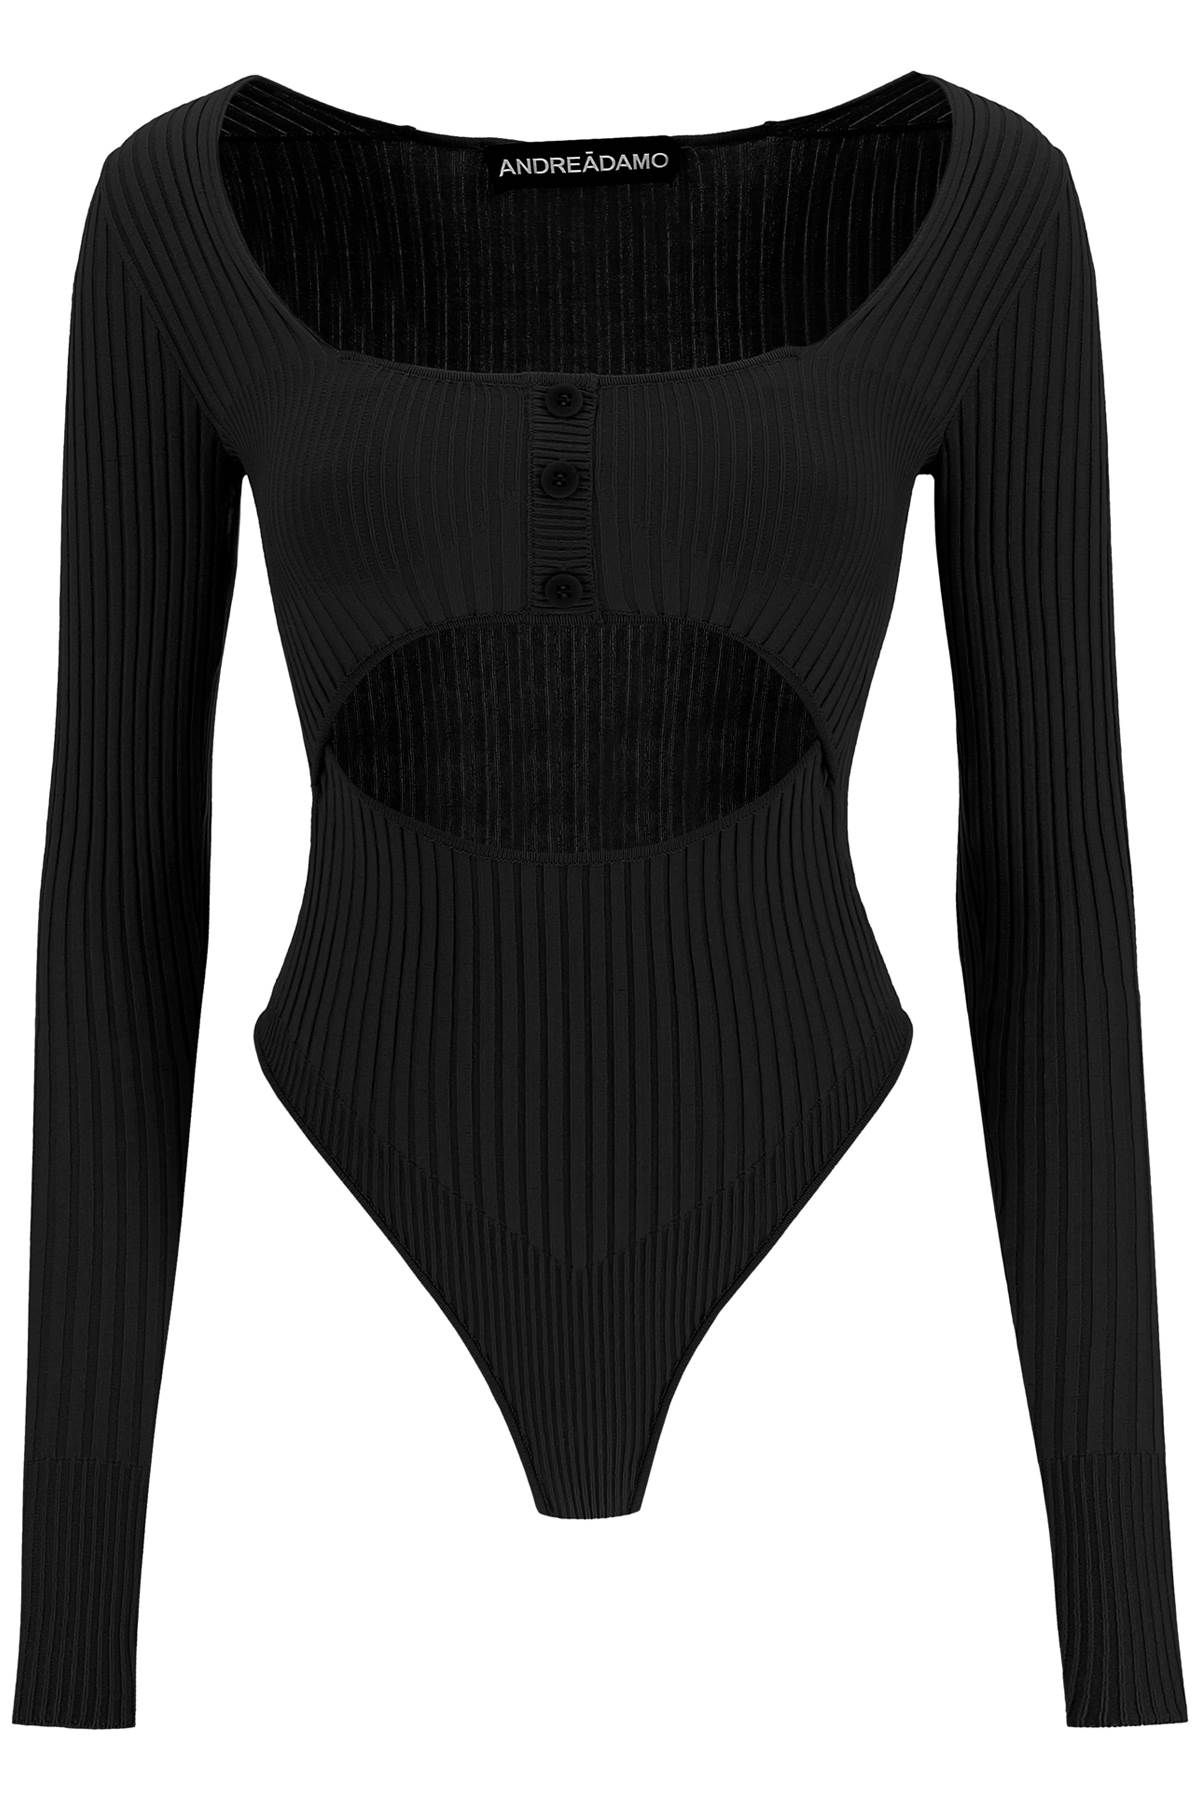 ANDREADAMO Knit Bodysuit With Cut-out